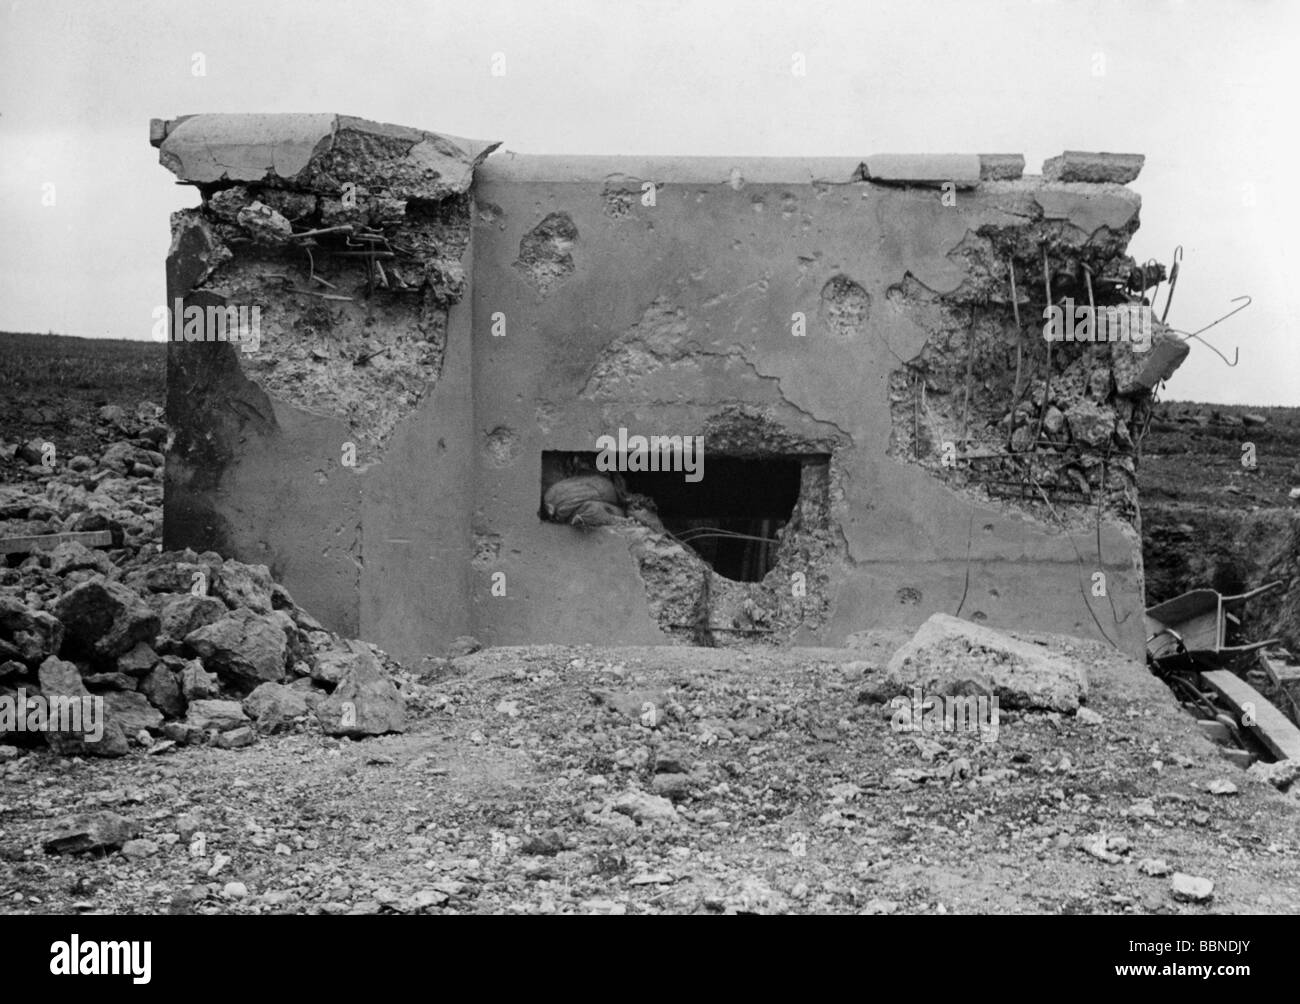 events, Second World War / WWII, France, Dieppe, 19.8.1942, destroyed bunker, Stock Photo